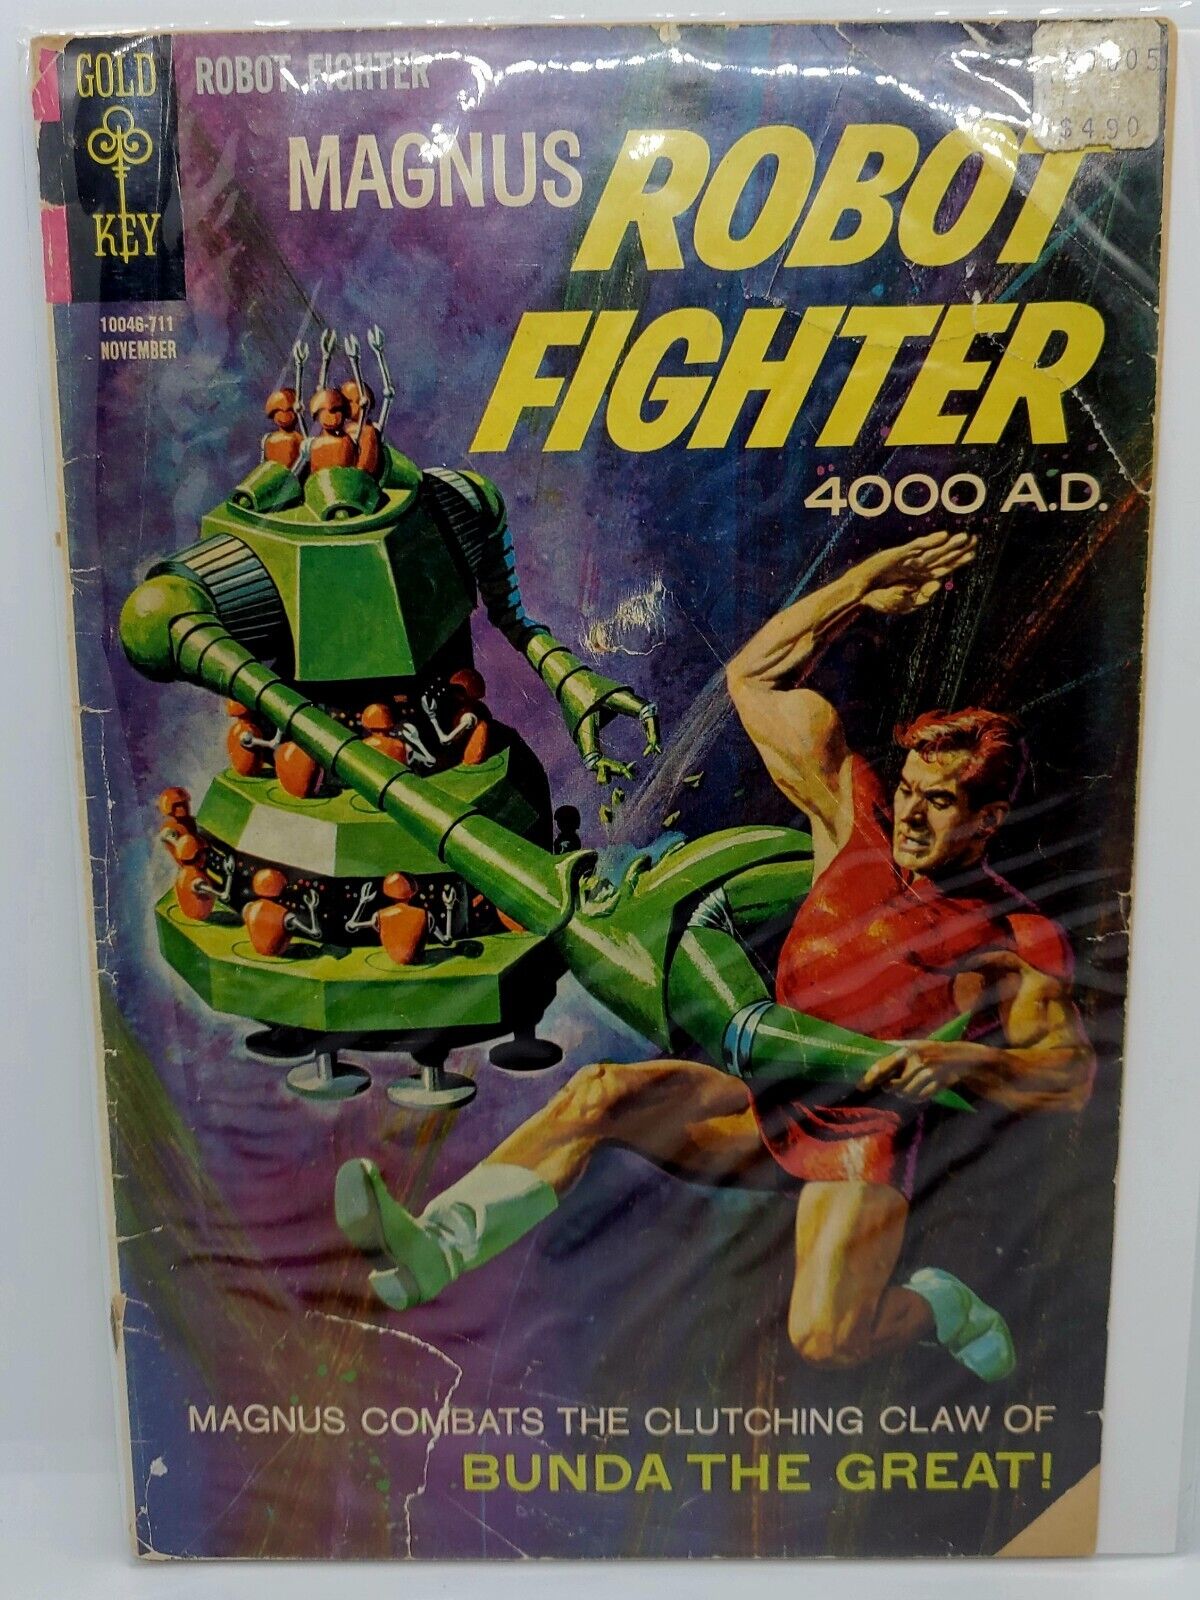 Vintage Robot Fighter 4000 AD #20 Gold Key Silver Age Russ Manning 1st Print 🔥